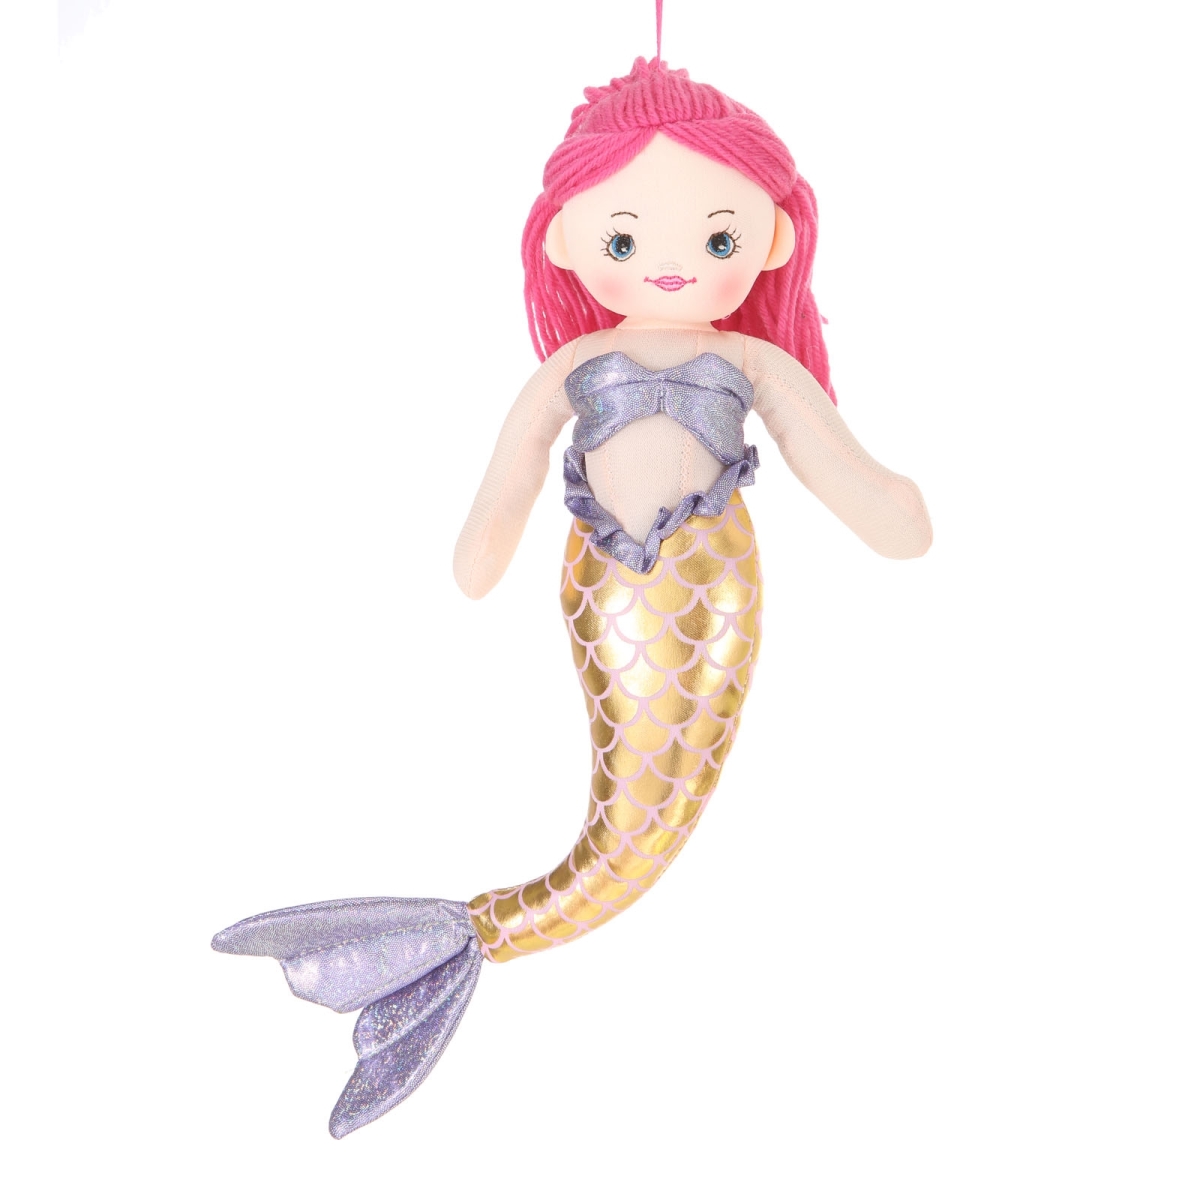 Mm04 16 In. Plush Haired Mermaid Doll - Pink